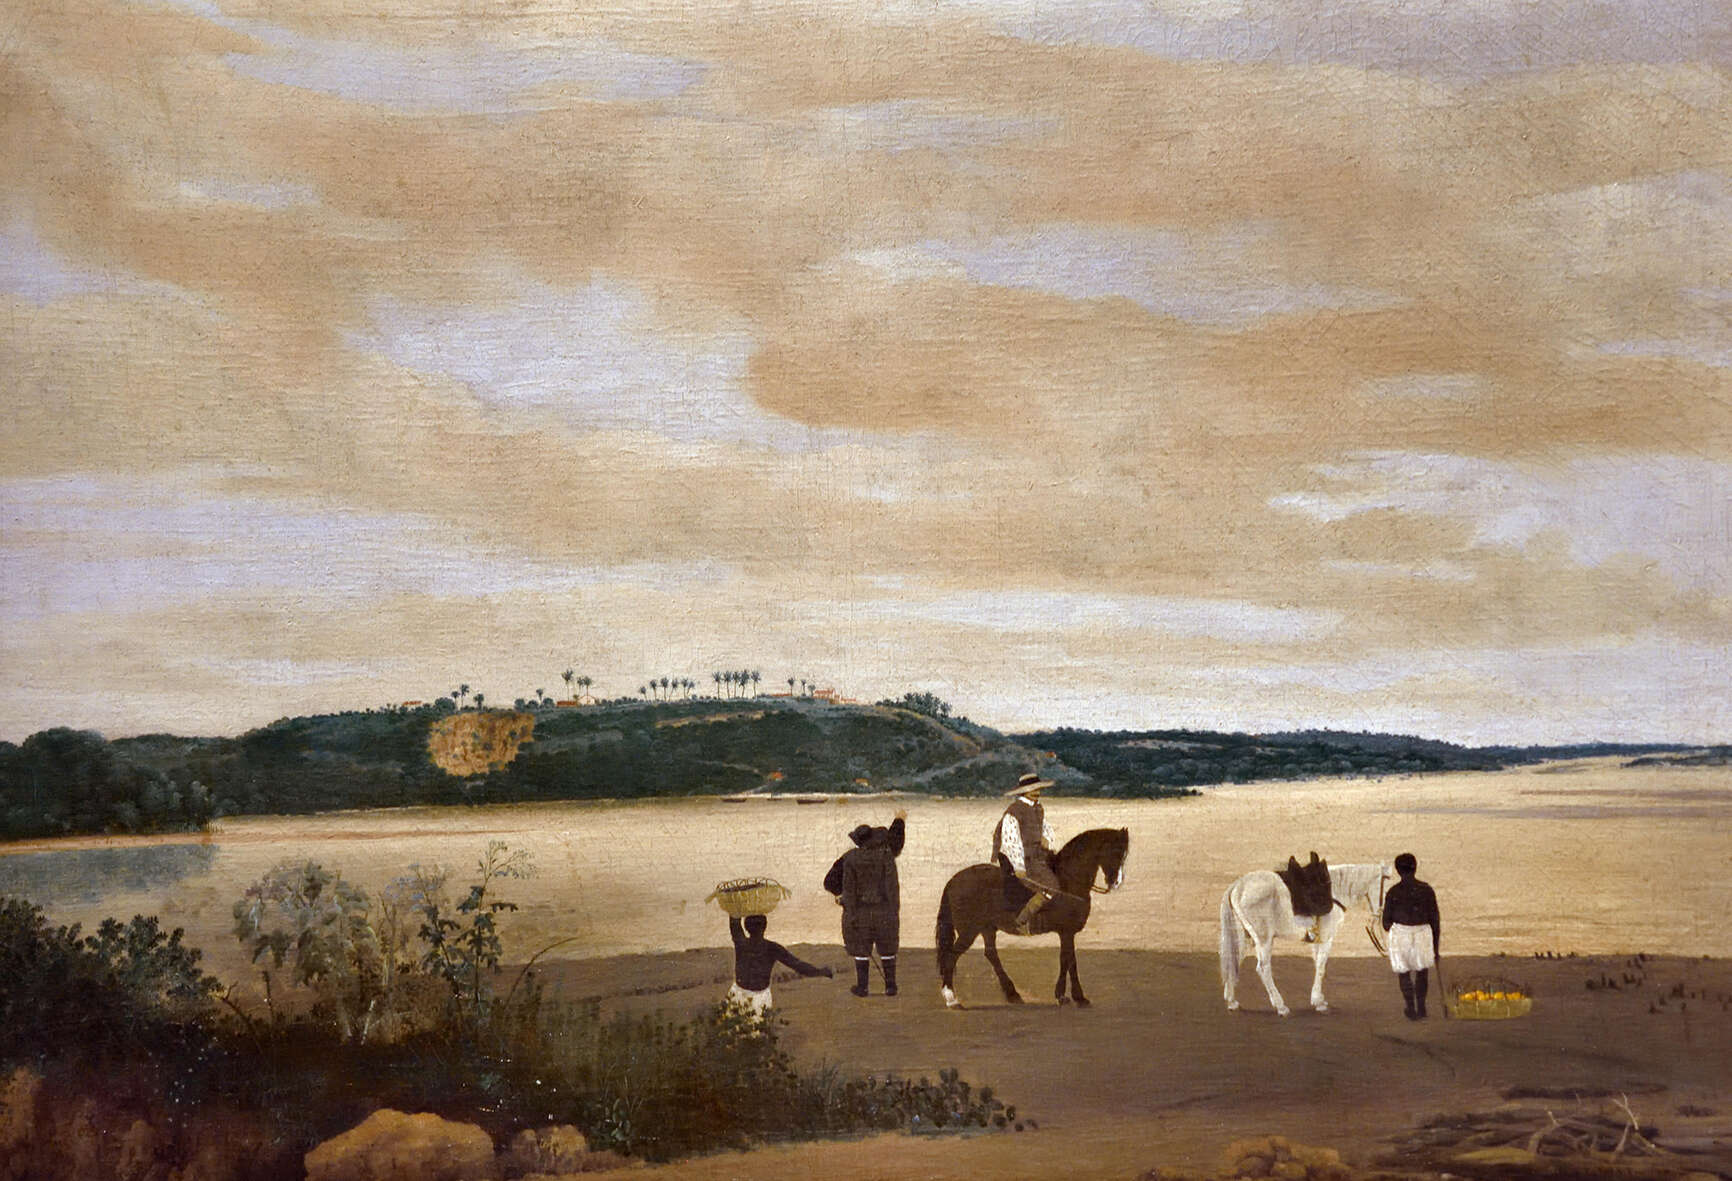 The Brazilian landscapes of Frans Post capture the dismal dawn of the colonial age